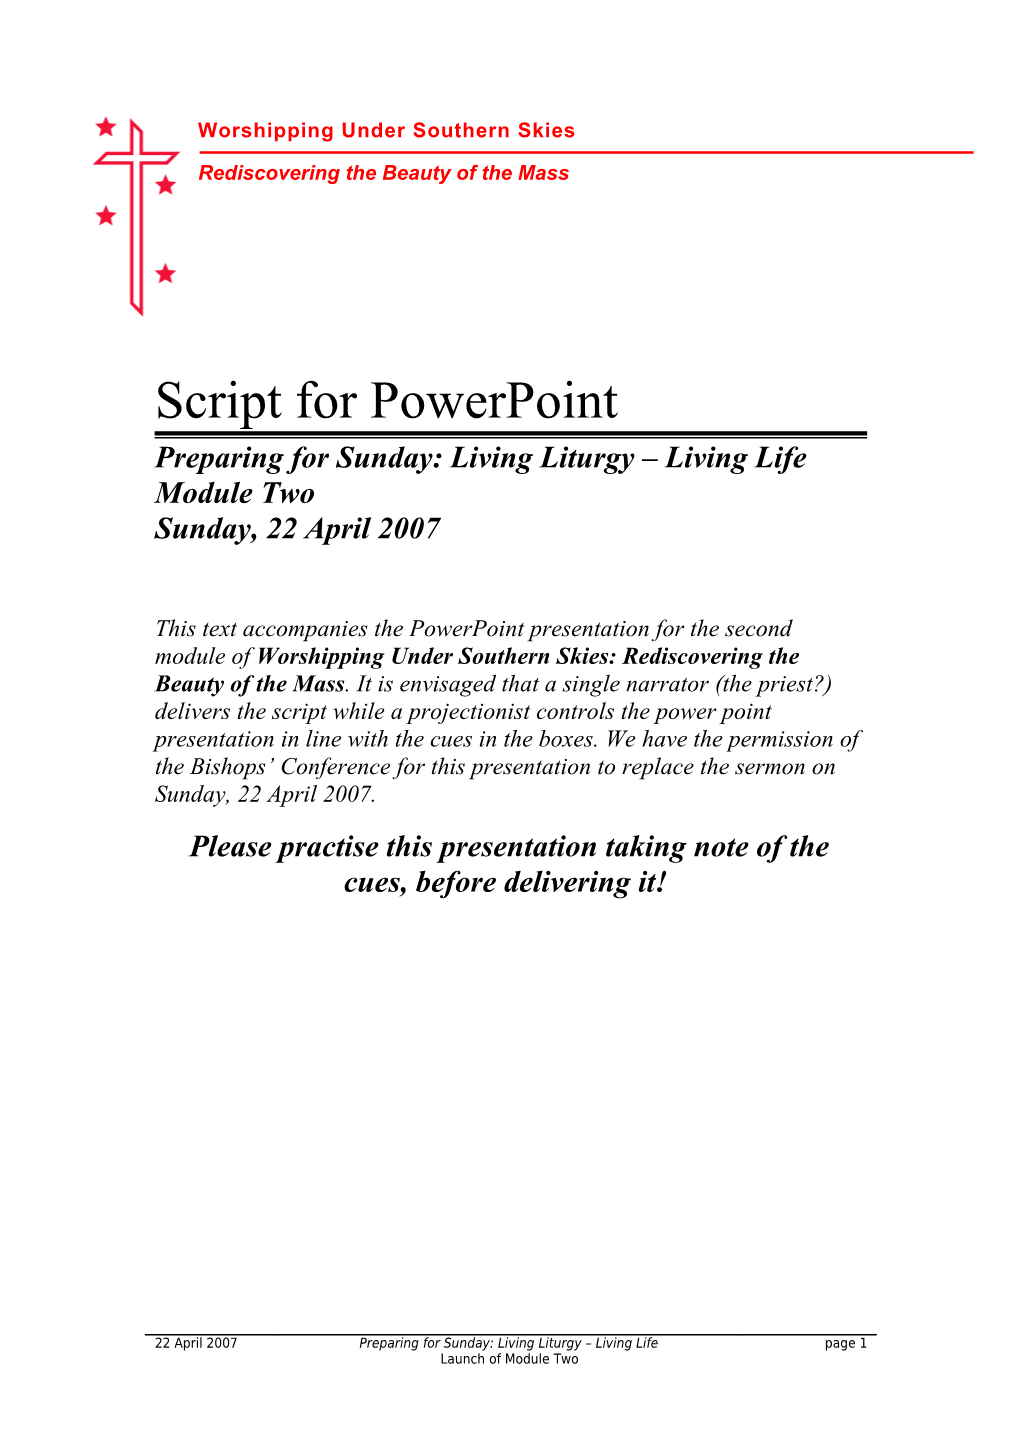 Script for Priest and Projectionist